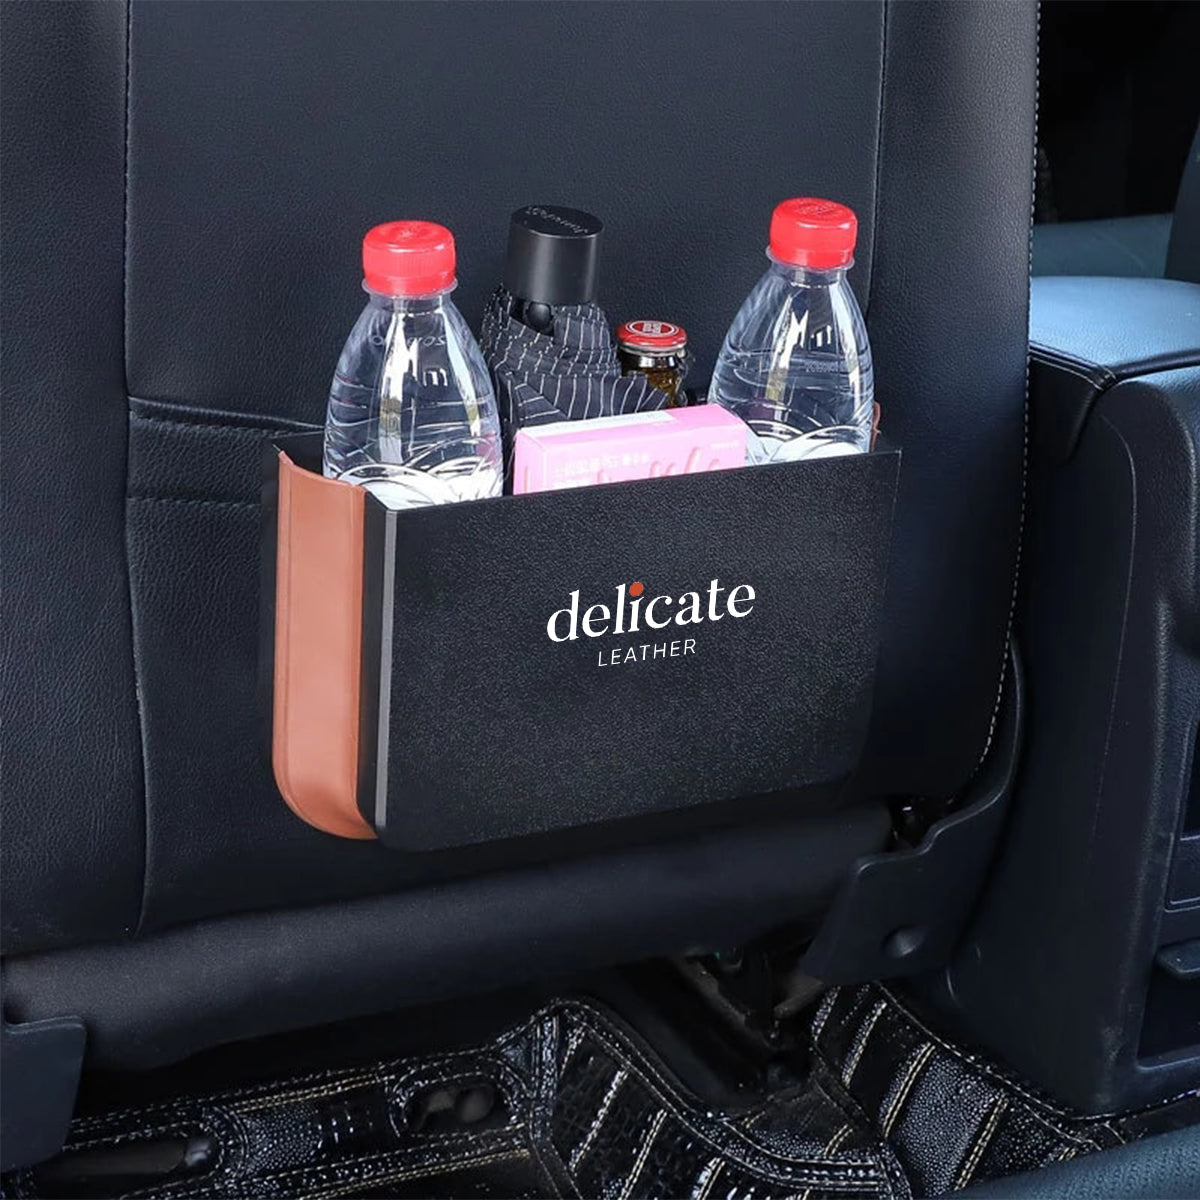 Hanging Waterproof Car Trash can-Foldable, Custom For Your Cars, Waterproof, and Equipped with Cup Holders and Trays. Multi-Purpose, Car Accessories SU11992 - Delicate Leather